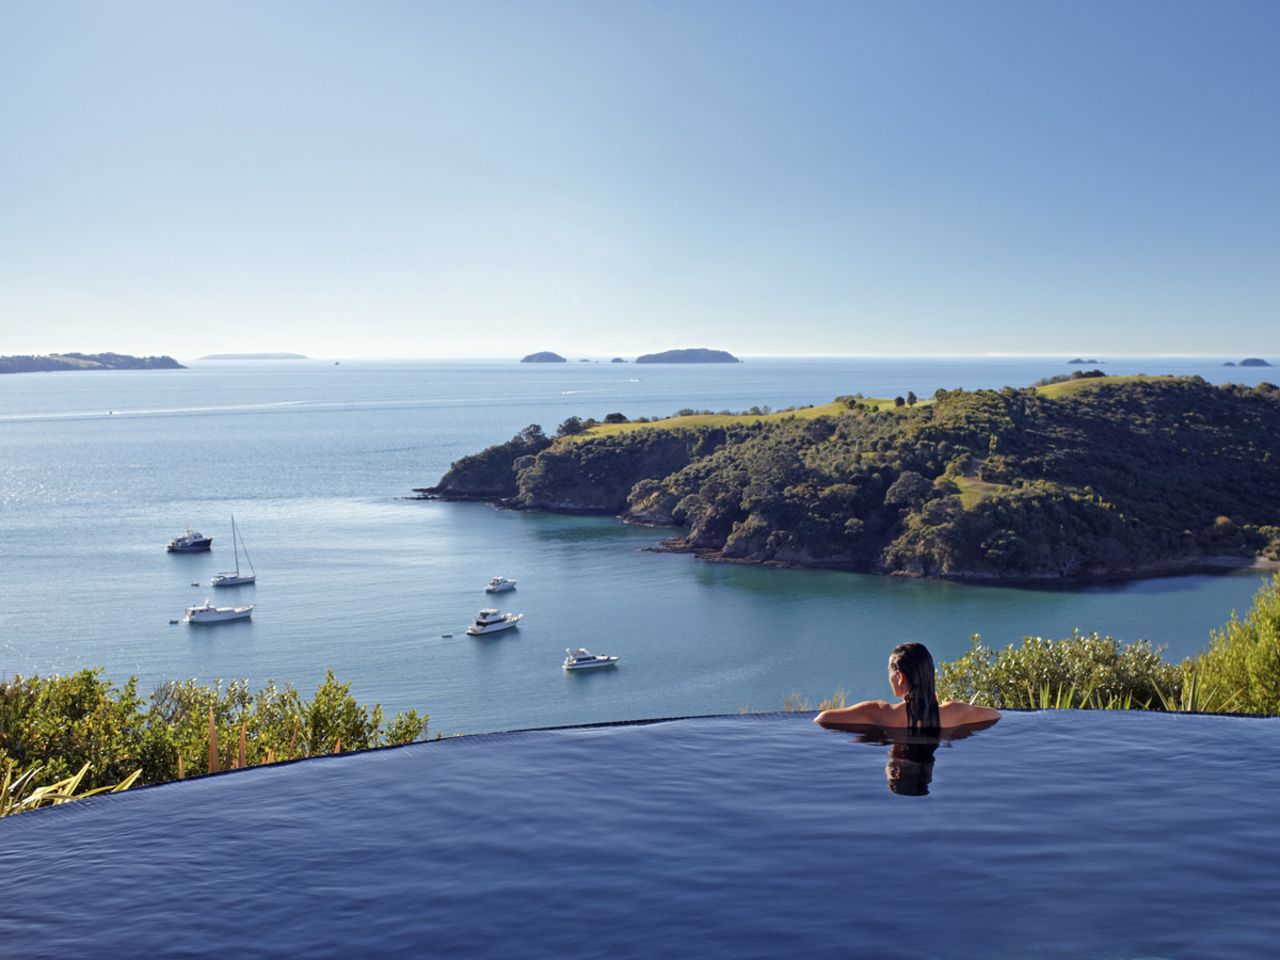 Earlier this year CNN sung the praises of Waiheke's sheltered beaches, emerald bays and boutique wineries in a roundup of <a href="http://edition.cnn.com/2015/02/10/travel/romantic-destinations/">romantic destinations</a>. Delamore Lodge's heated infinity pool has incredible views over Owhaneke Bay. 